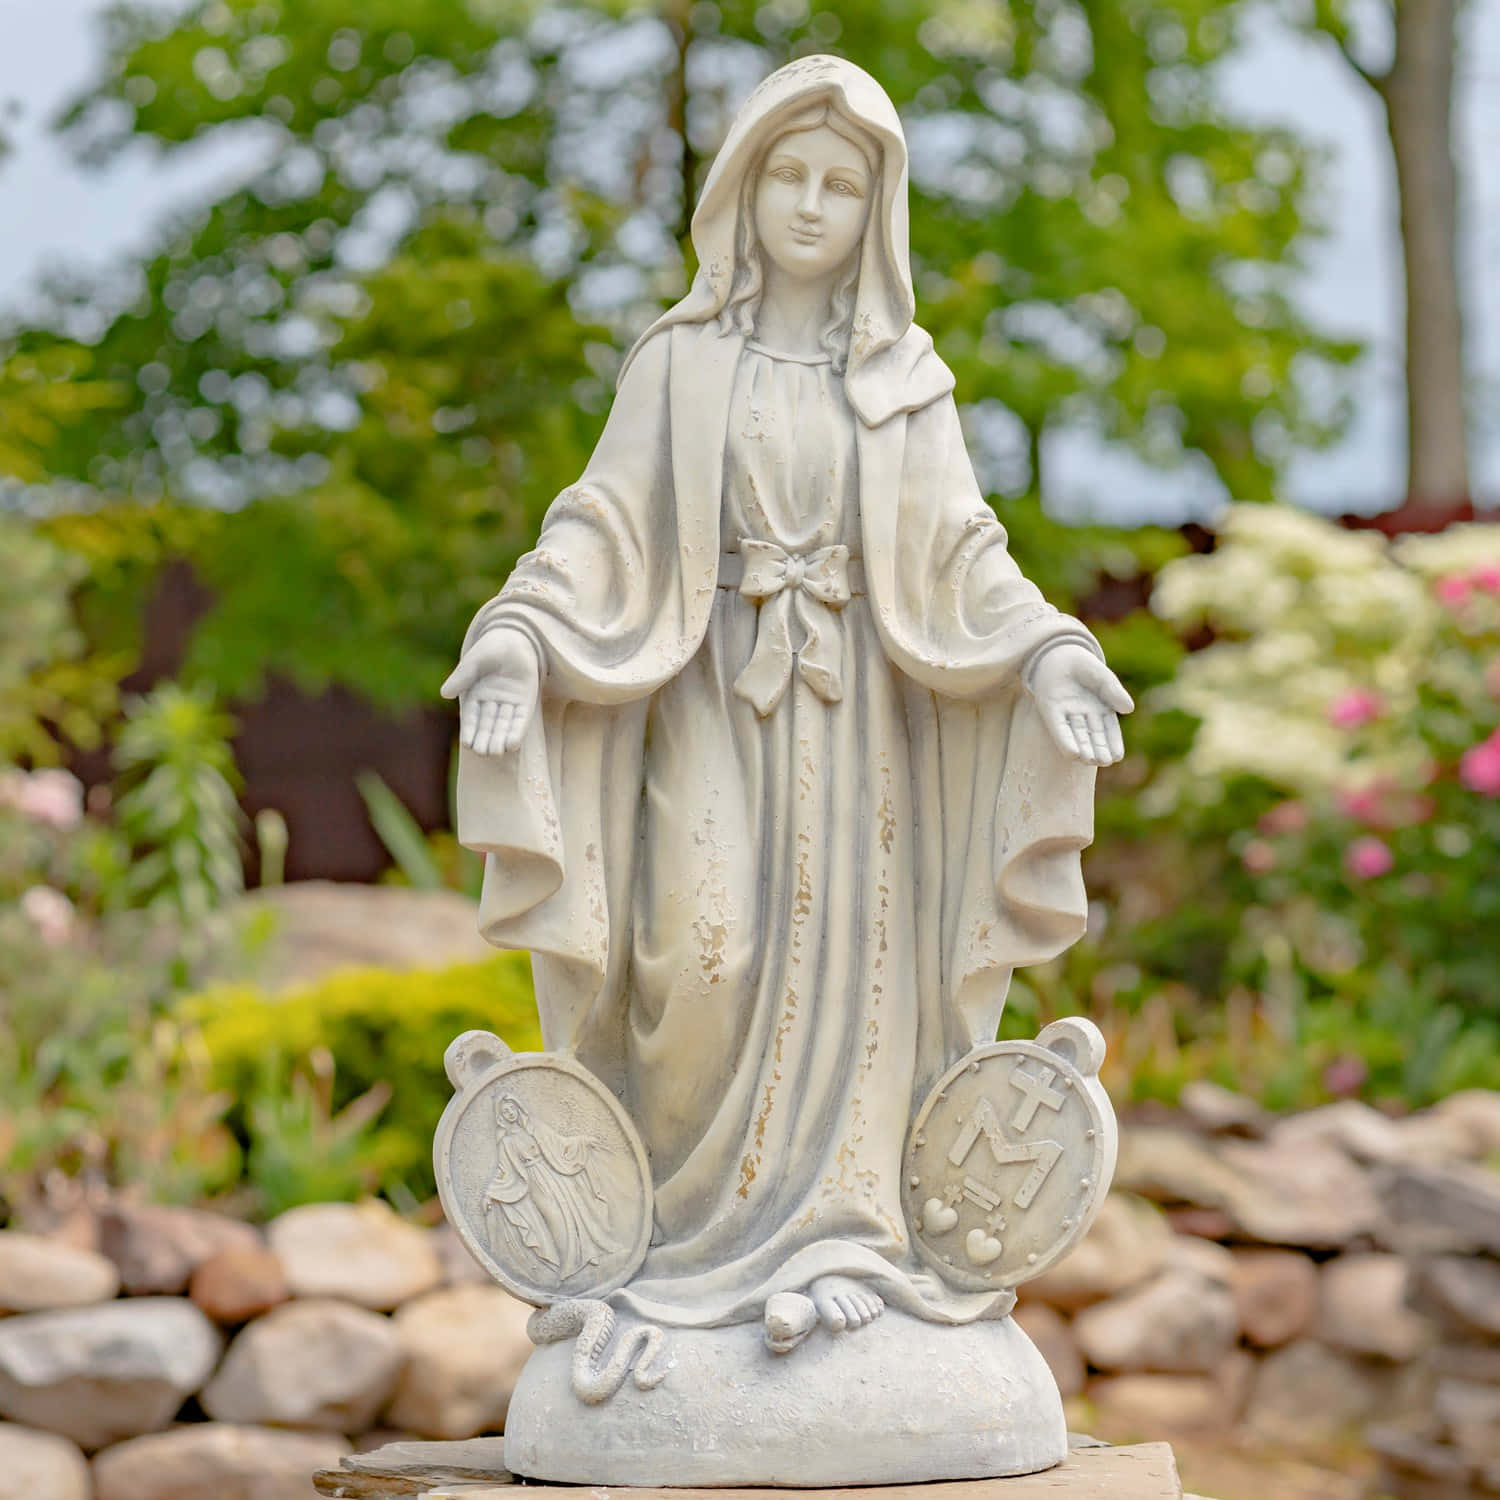 A depiction of the Blessed Mother Mary.